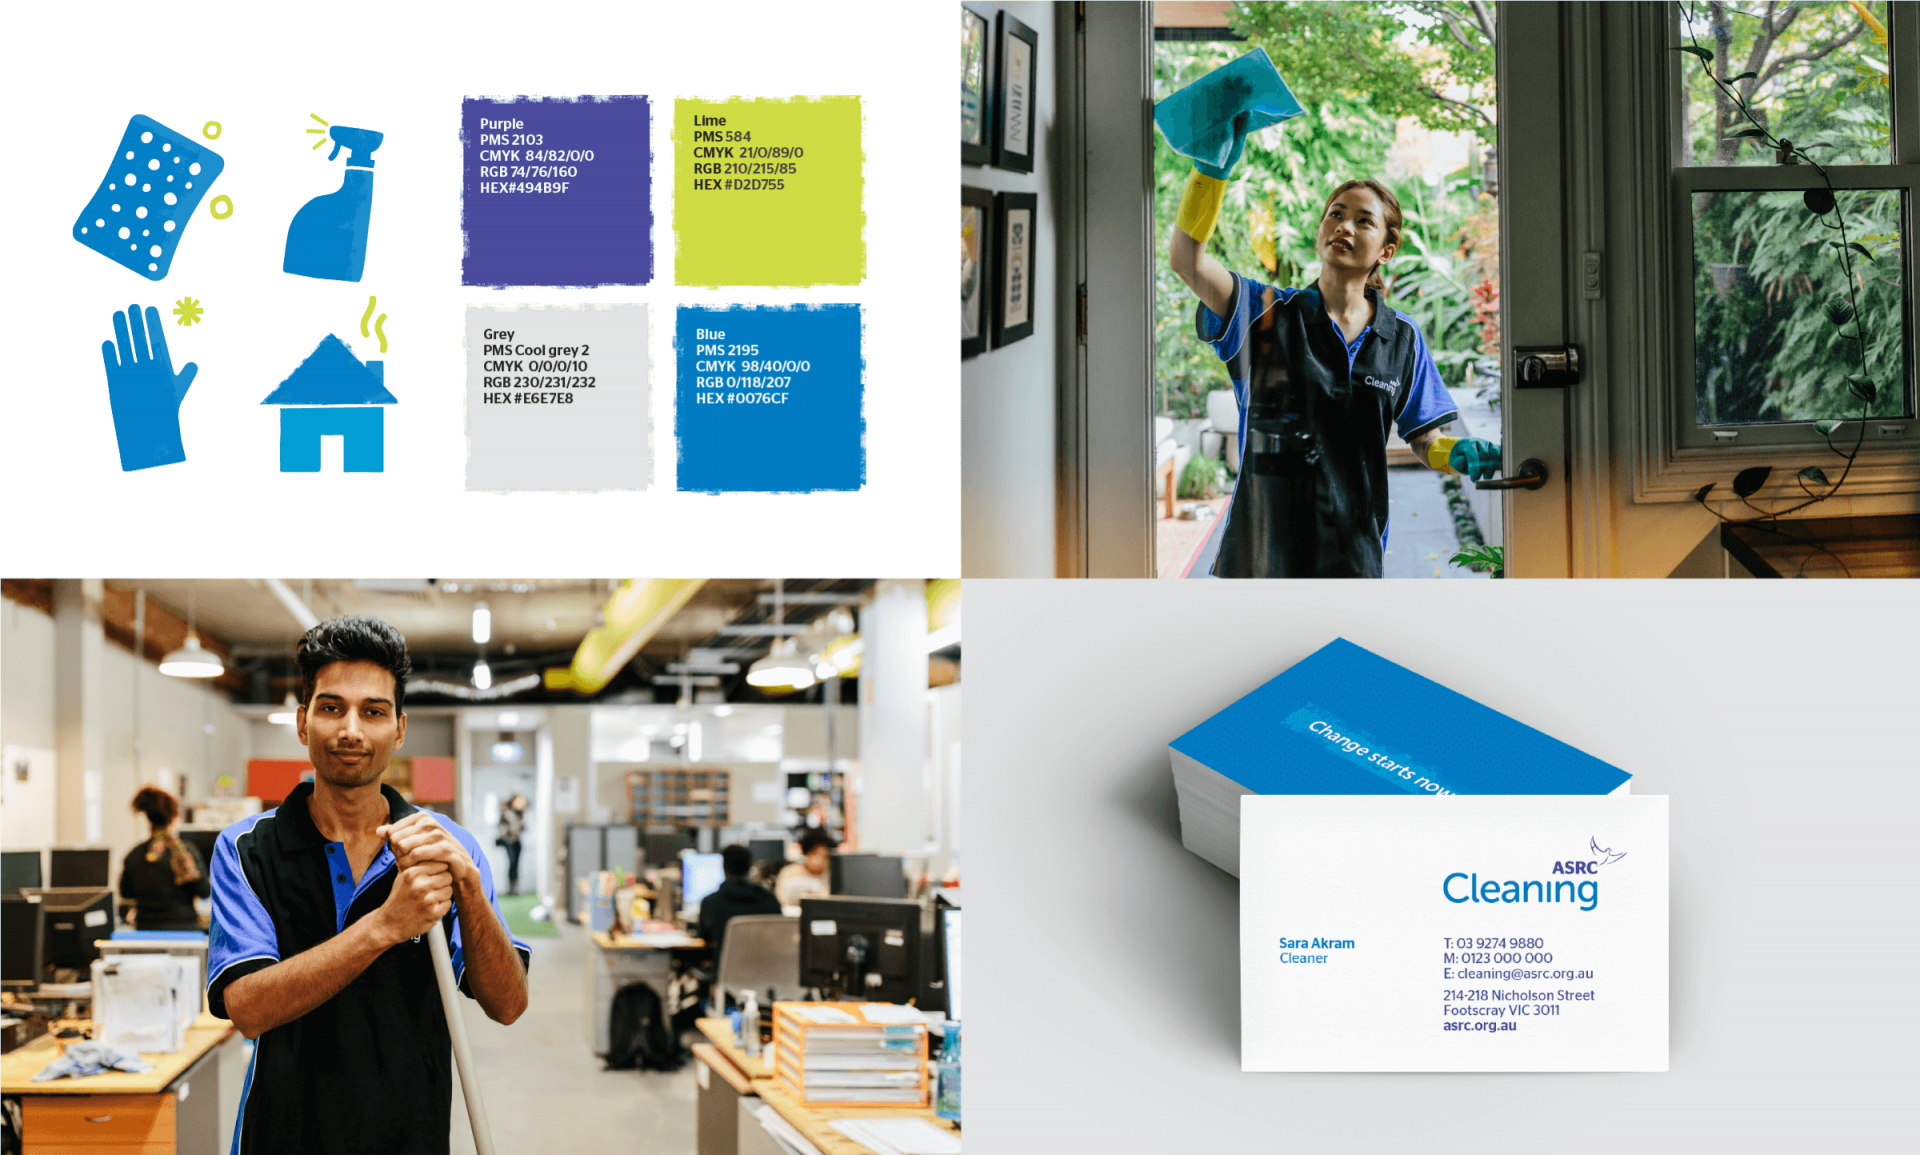 Branding for ASRC Cleaning including illustrations, colour palette, business cards and photography of their staff at work